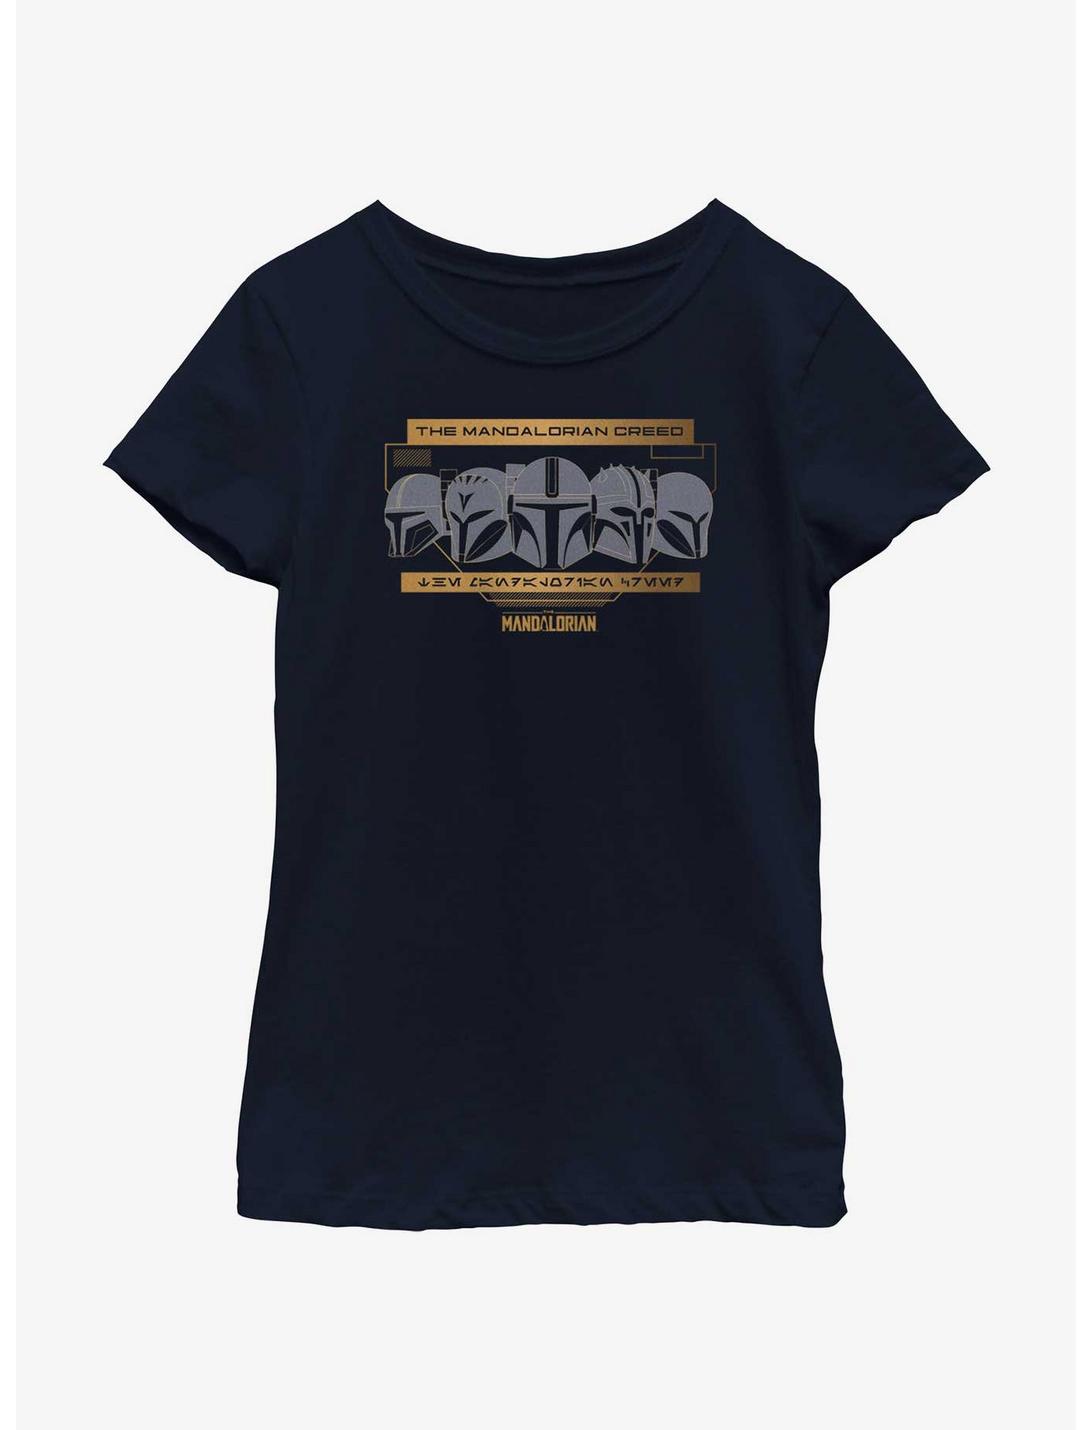 Star Wars The Mandalorian Helmets of the Creed Youth Girls T-Shirt, NAVY, hi-res